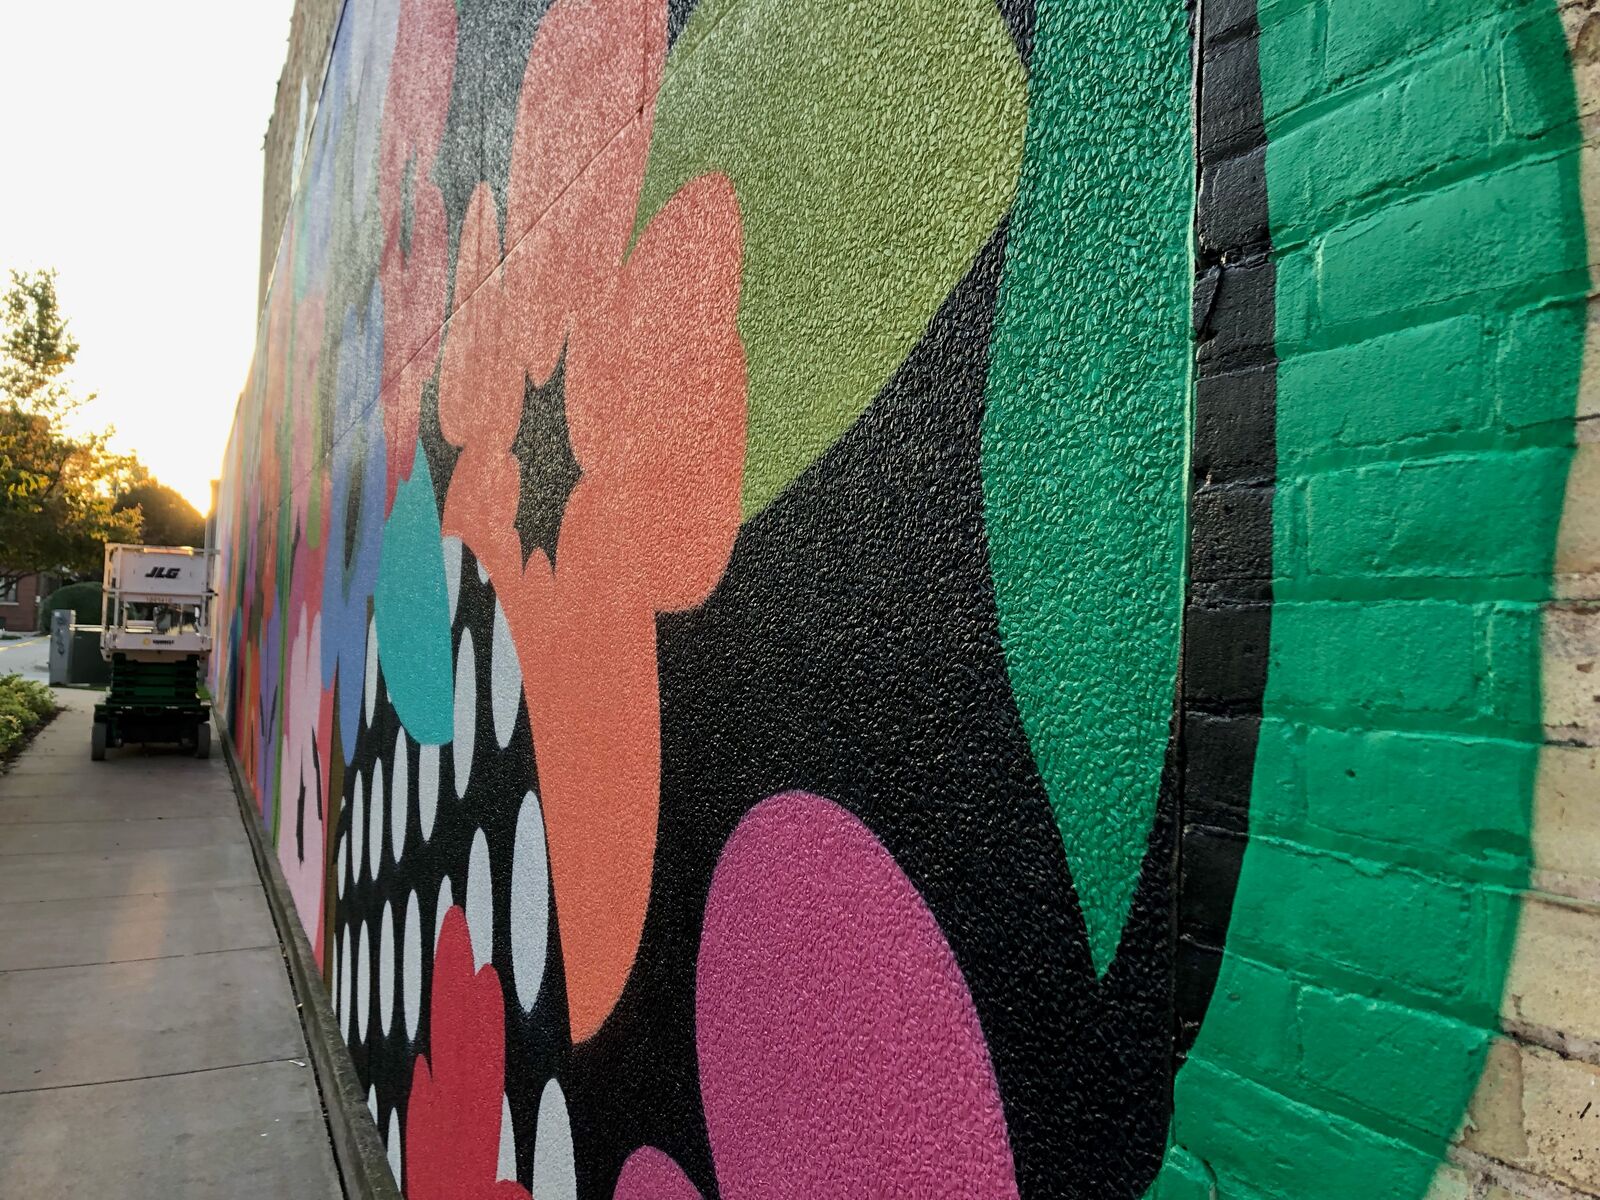 A brick wall with a mural painted on it.